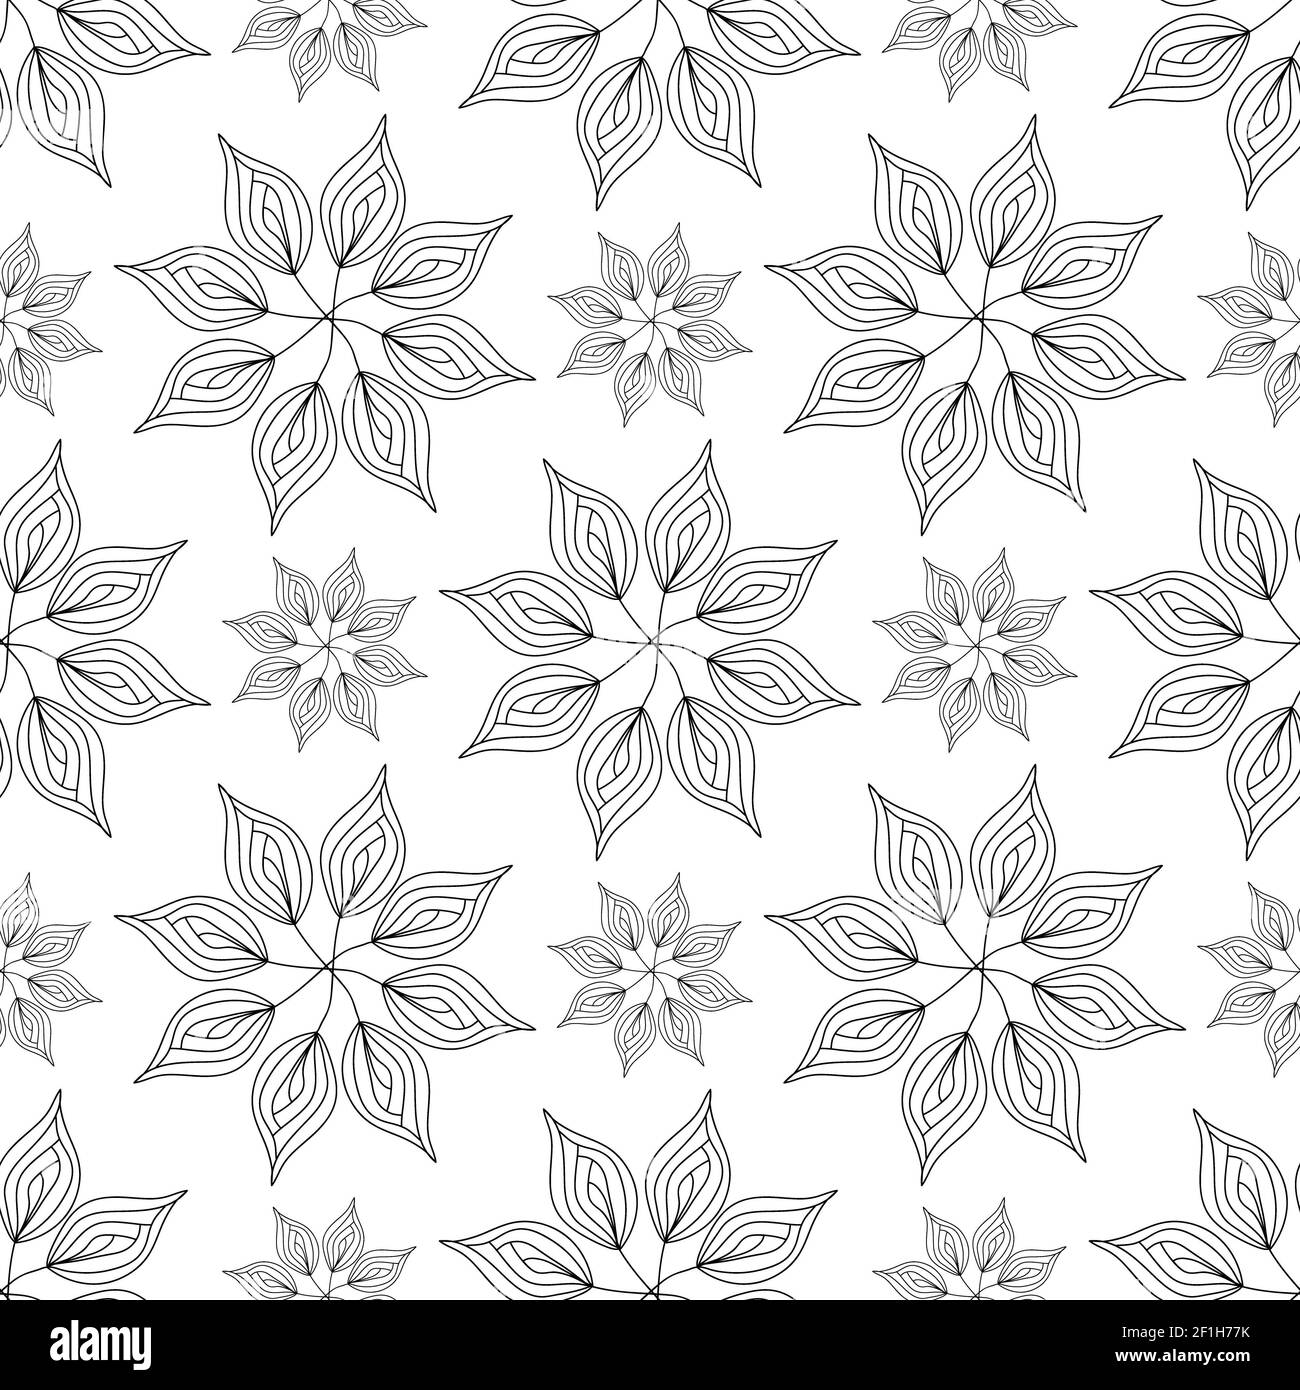 Seamless vector pattern, floral ornament Stock Photo